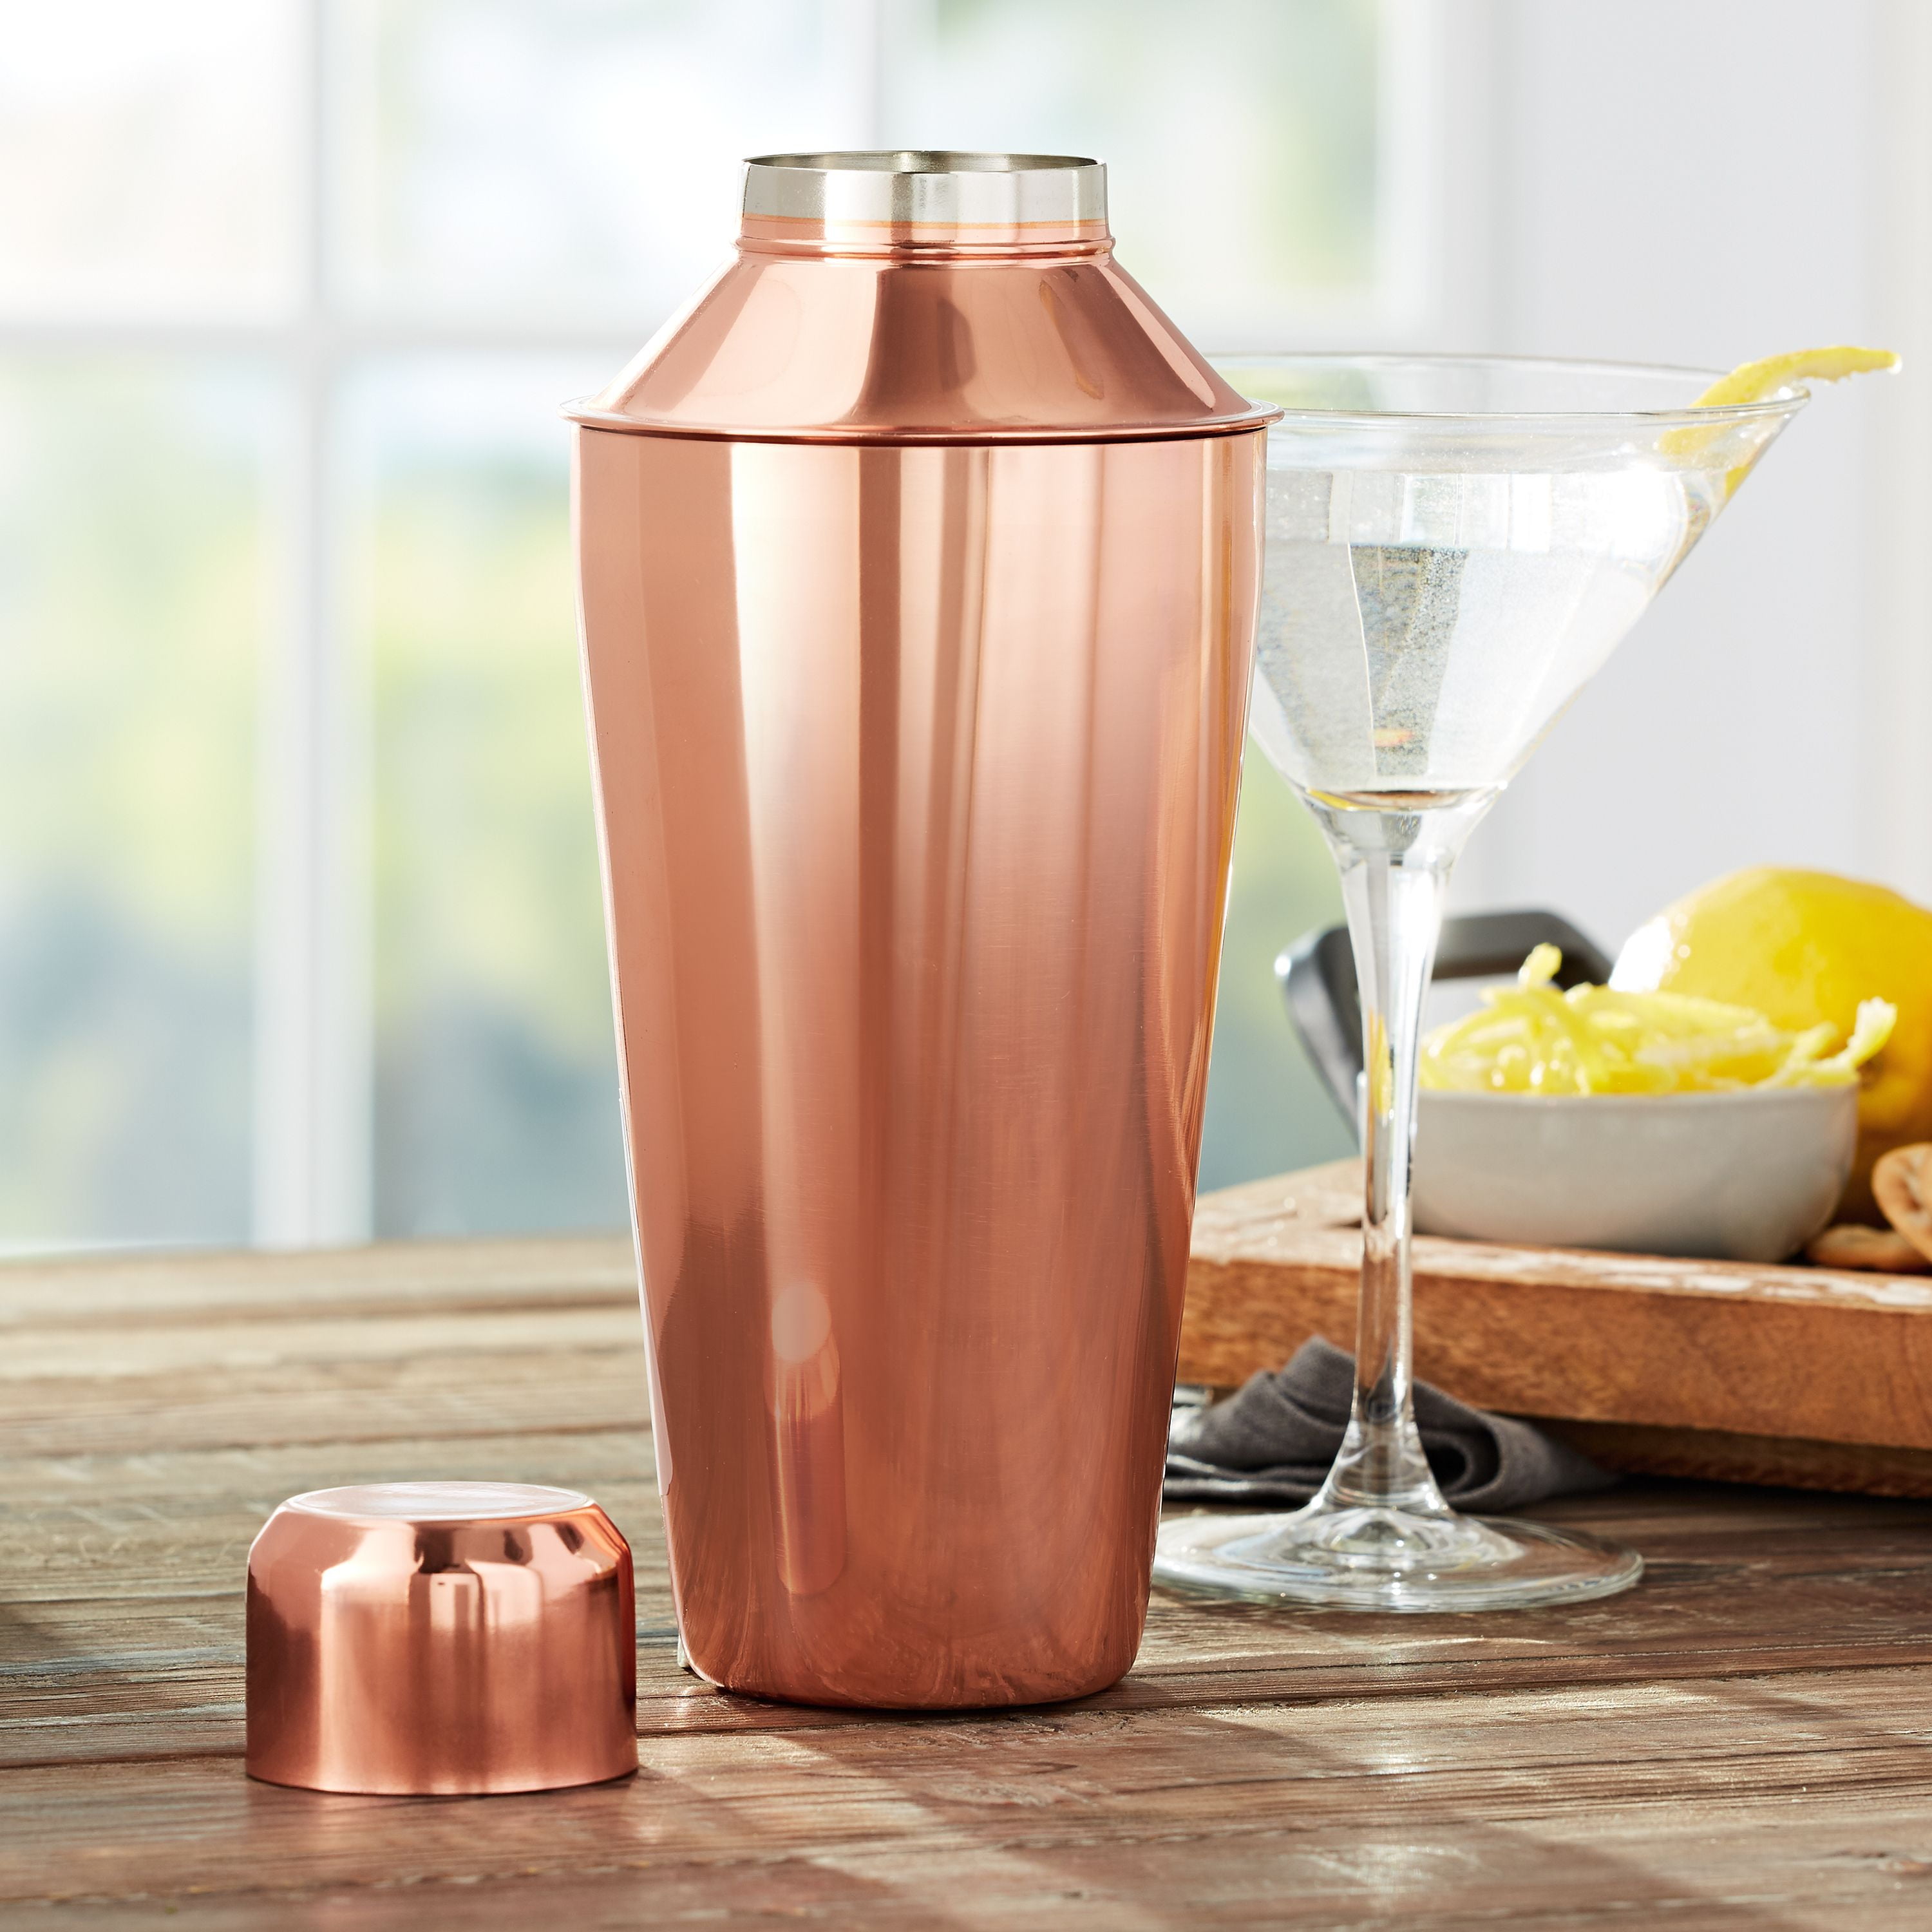 Handcrafted Martini Shaker in Polished Copper made by SoLuna